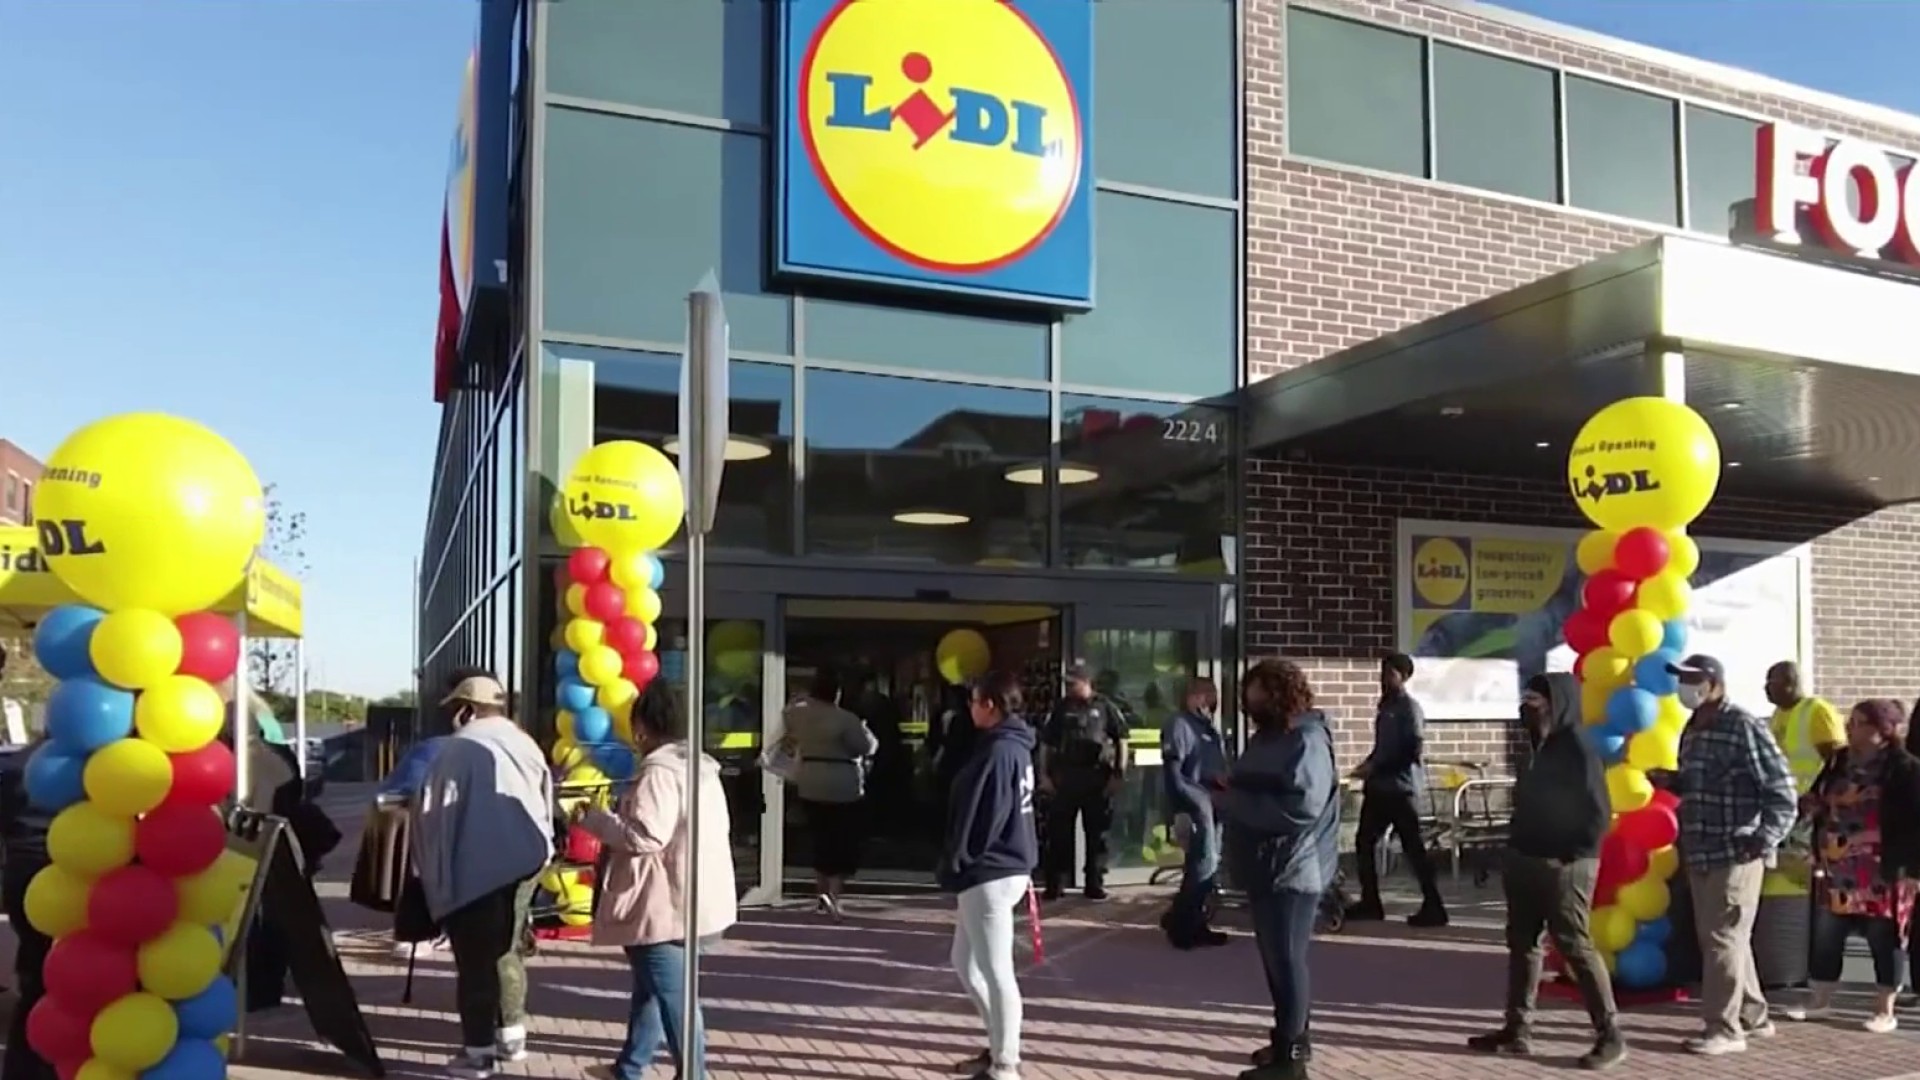 flooded with sellers looking to cash in on Lidl sneakers 